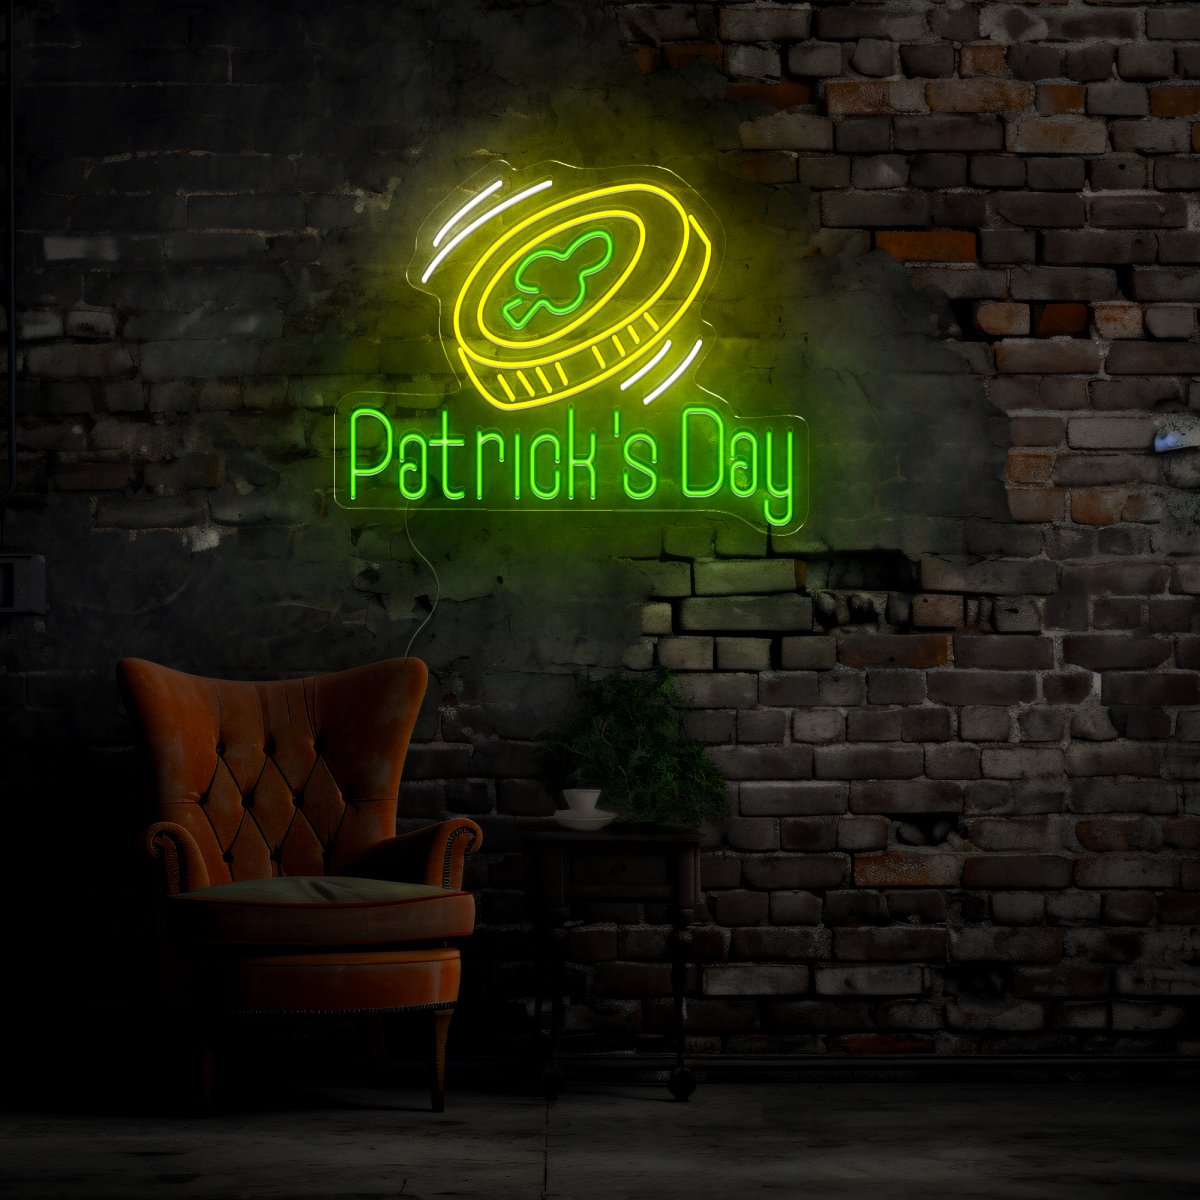 St. Patrick's Lucky Day Neon Sign - Reels Custom